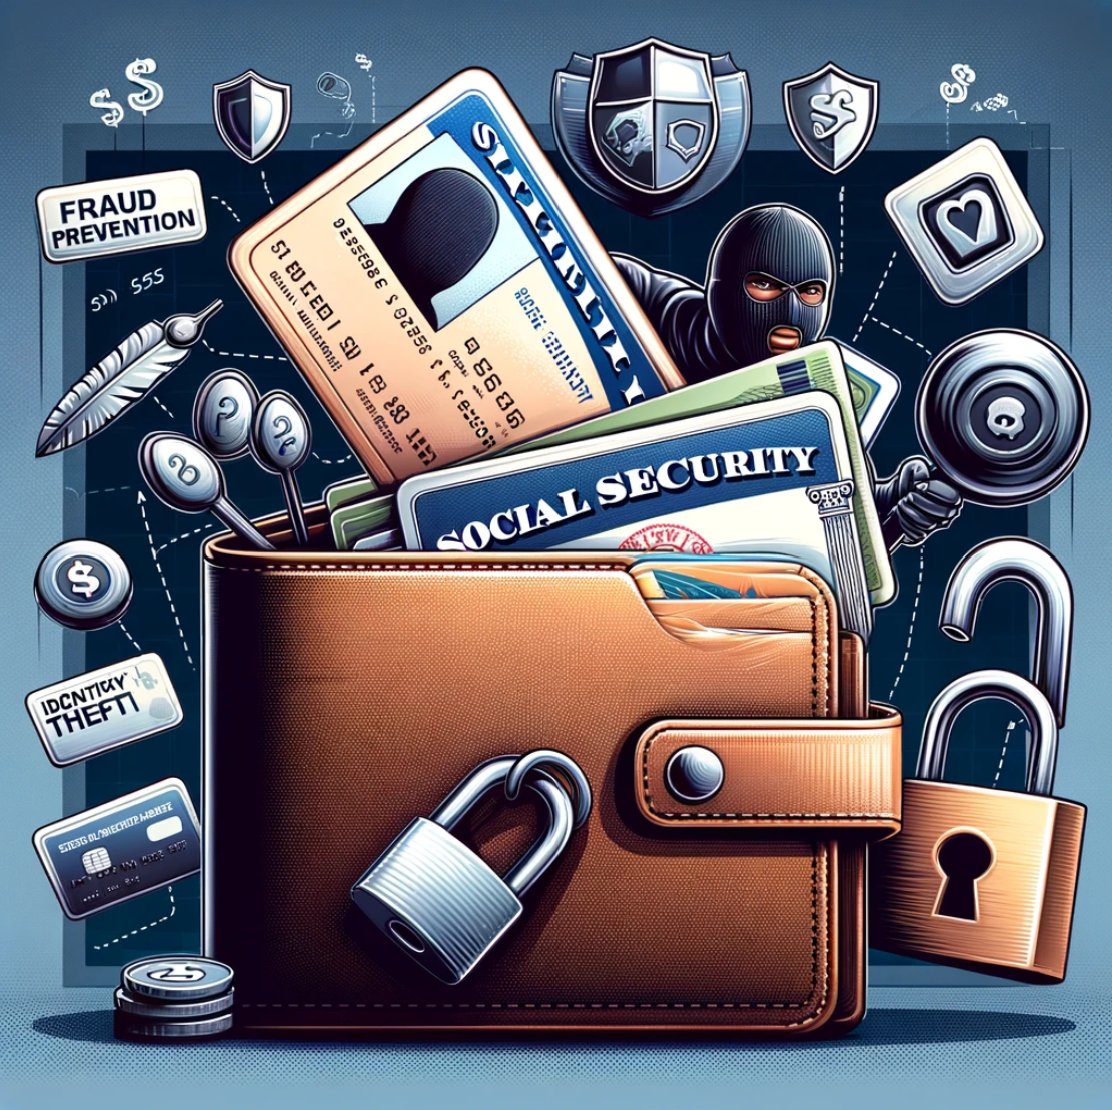 'Stay safe from economic crimes! 🔐 Many fraud cases involve the misuse of social security numbers. Keep your SSN card at home — there's no need to carry it with you. Protect your identity! #FraudPrevention #IdentityTheft #PersonalSafety'